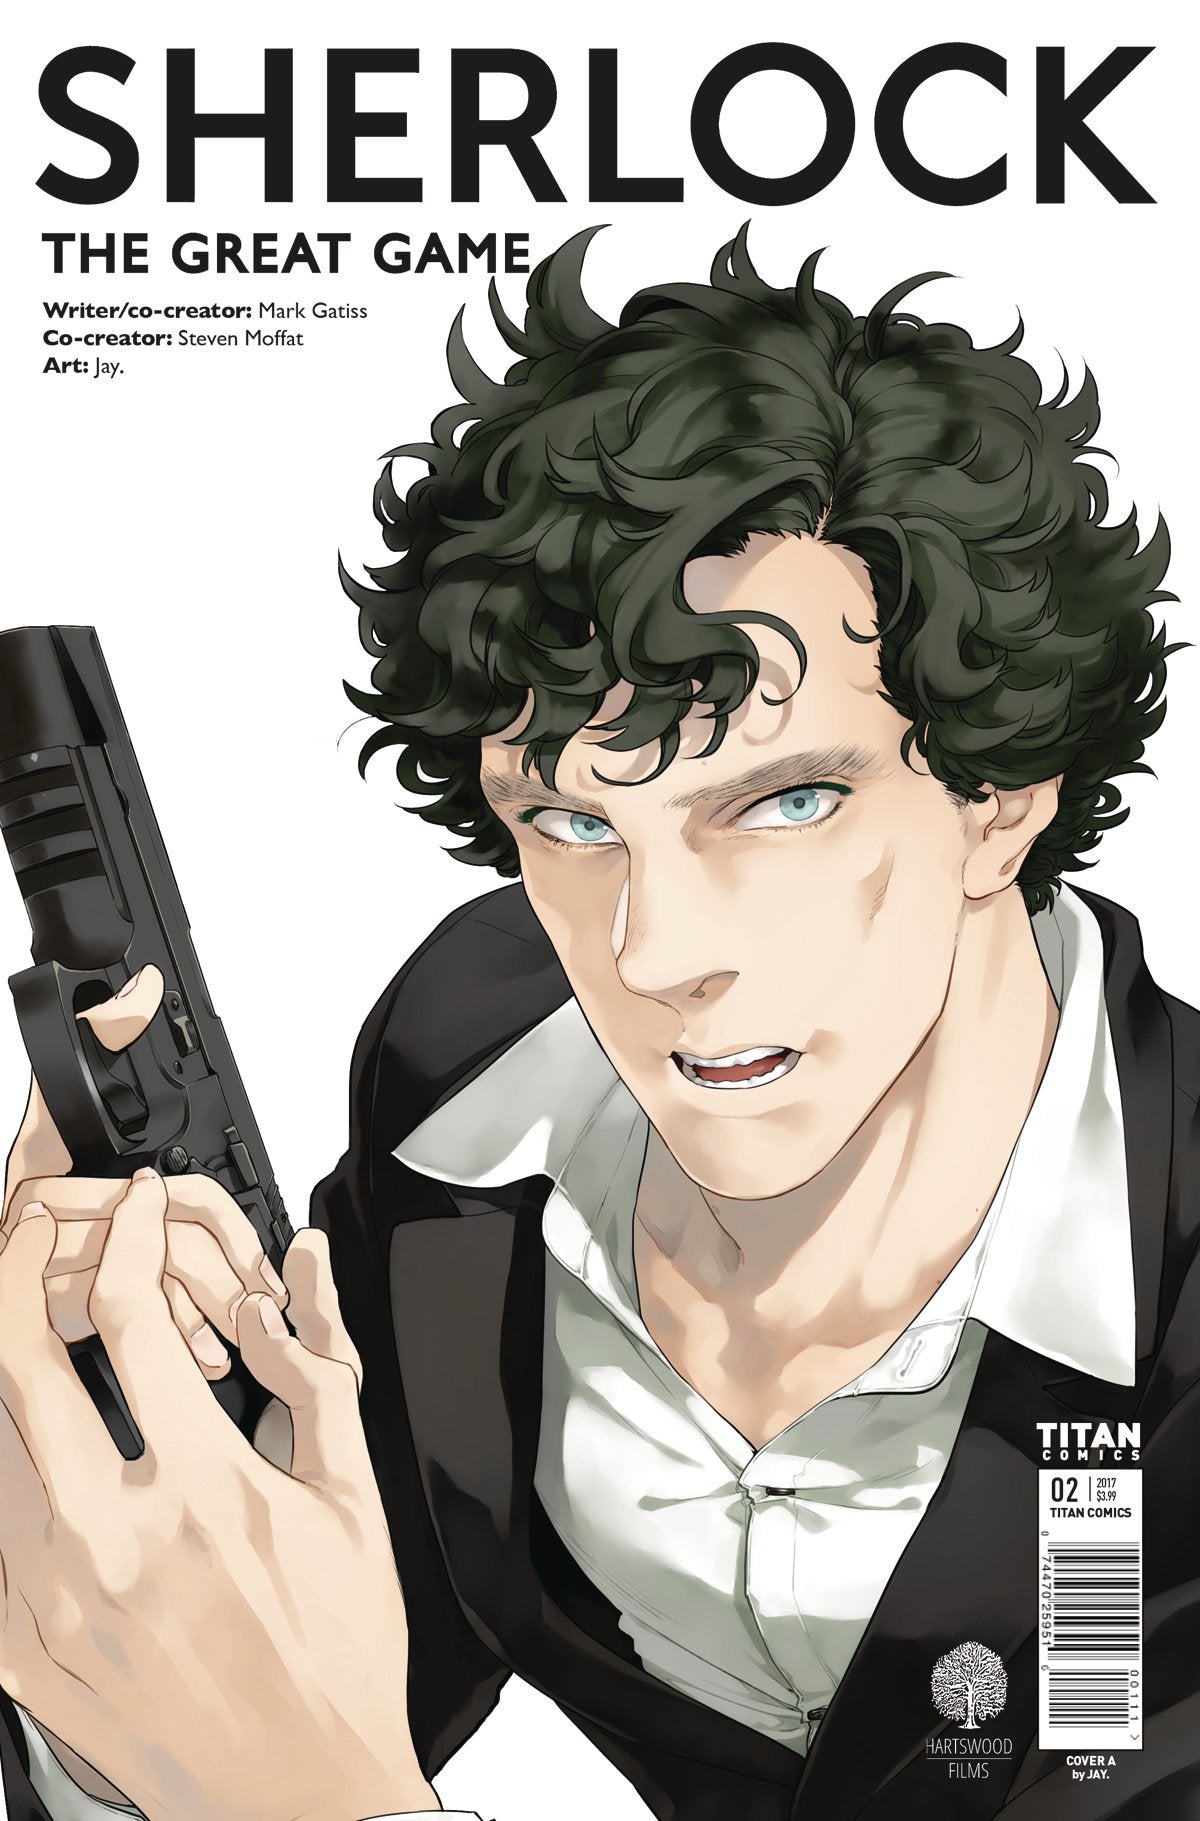 SHERLOCK THE GREAT GAME #2 (OF 6) CVR A JAY COVER